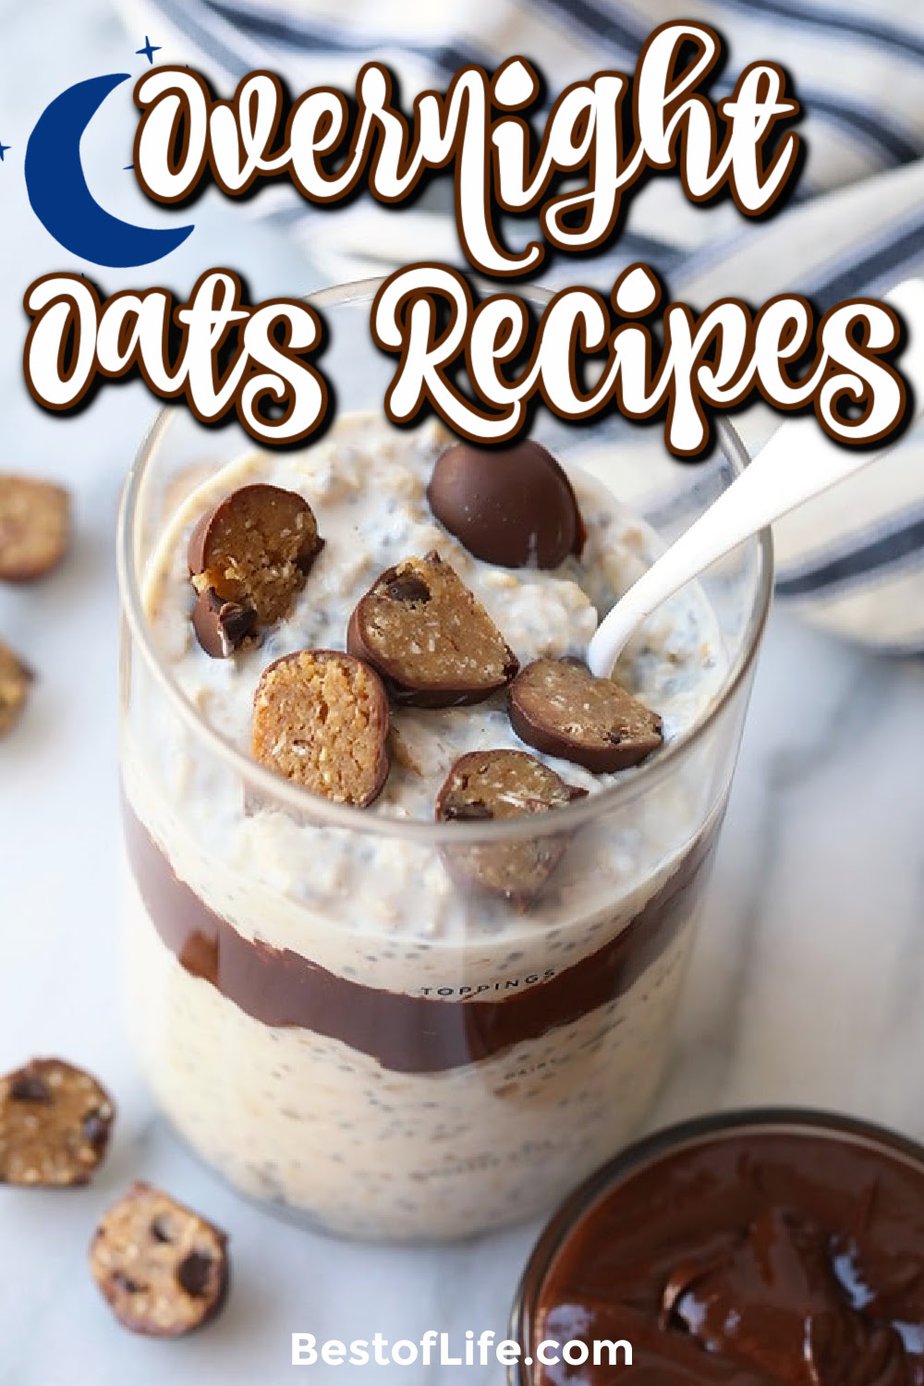 The best overnight oats in a jar recipes offer a healthy breakfast that anyone in the family can take on the go. These overnight oats recipes are also the perfect healthy snack option. Overnight Oats Recipes | Best Overnight Oats | Healthy Overnight Oats Recipes | Breakfast Recipes | Healthy Breakfast Recipes | Overnight Breakfast Recipes | Breakfast with Oats #mealprep #breakfastrecipes